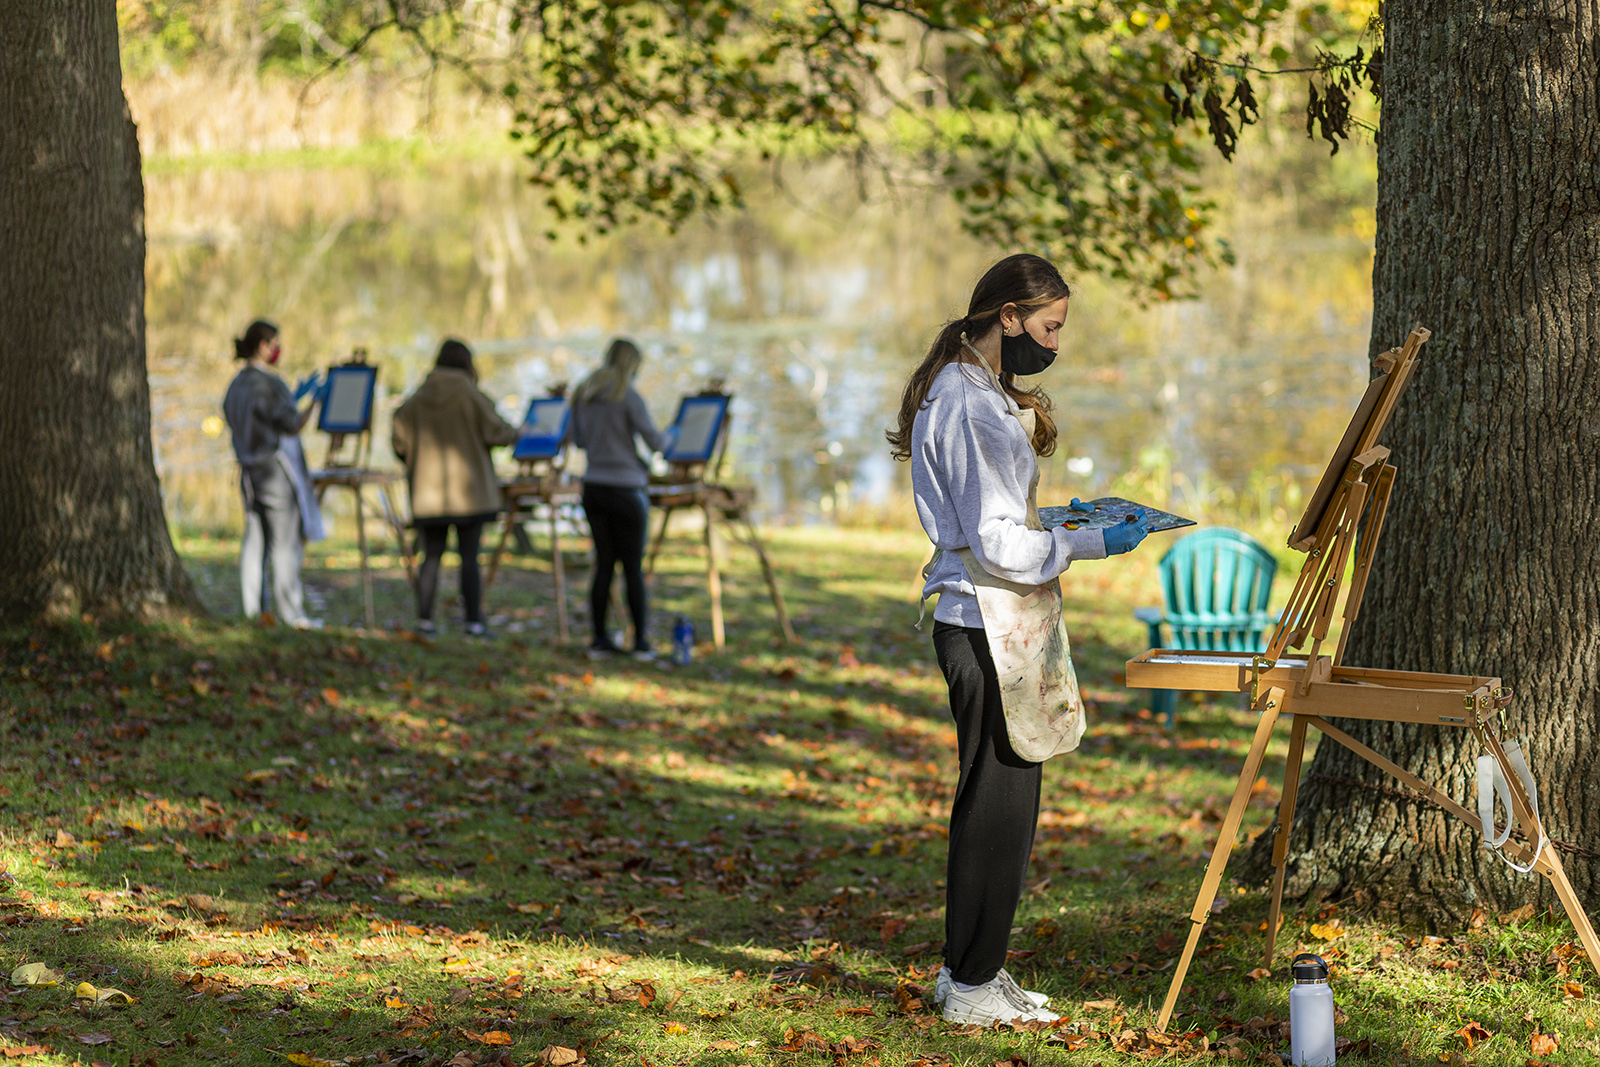 Students paint on easels outdoors while wearing masks